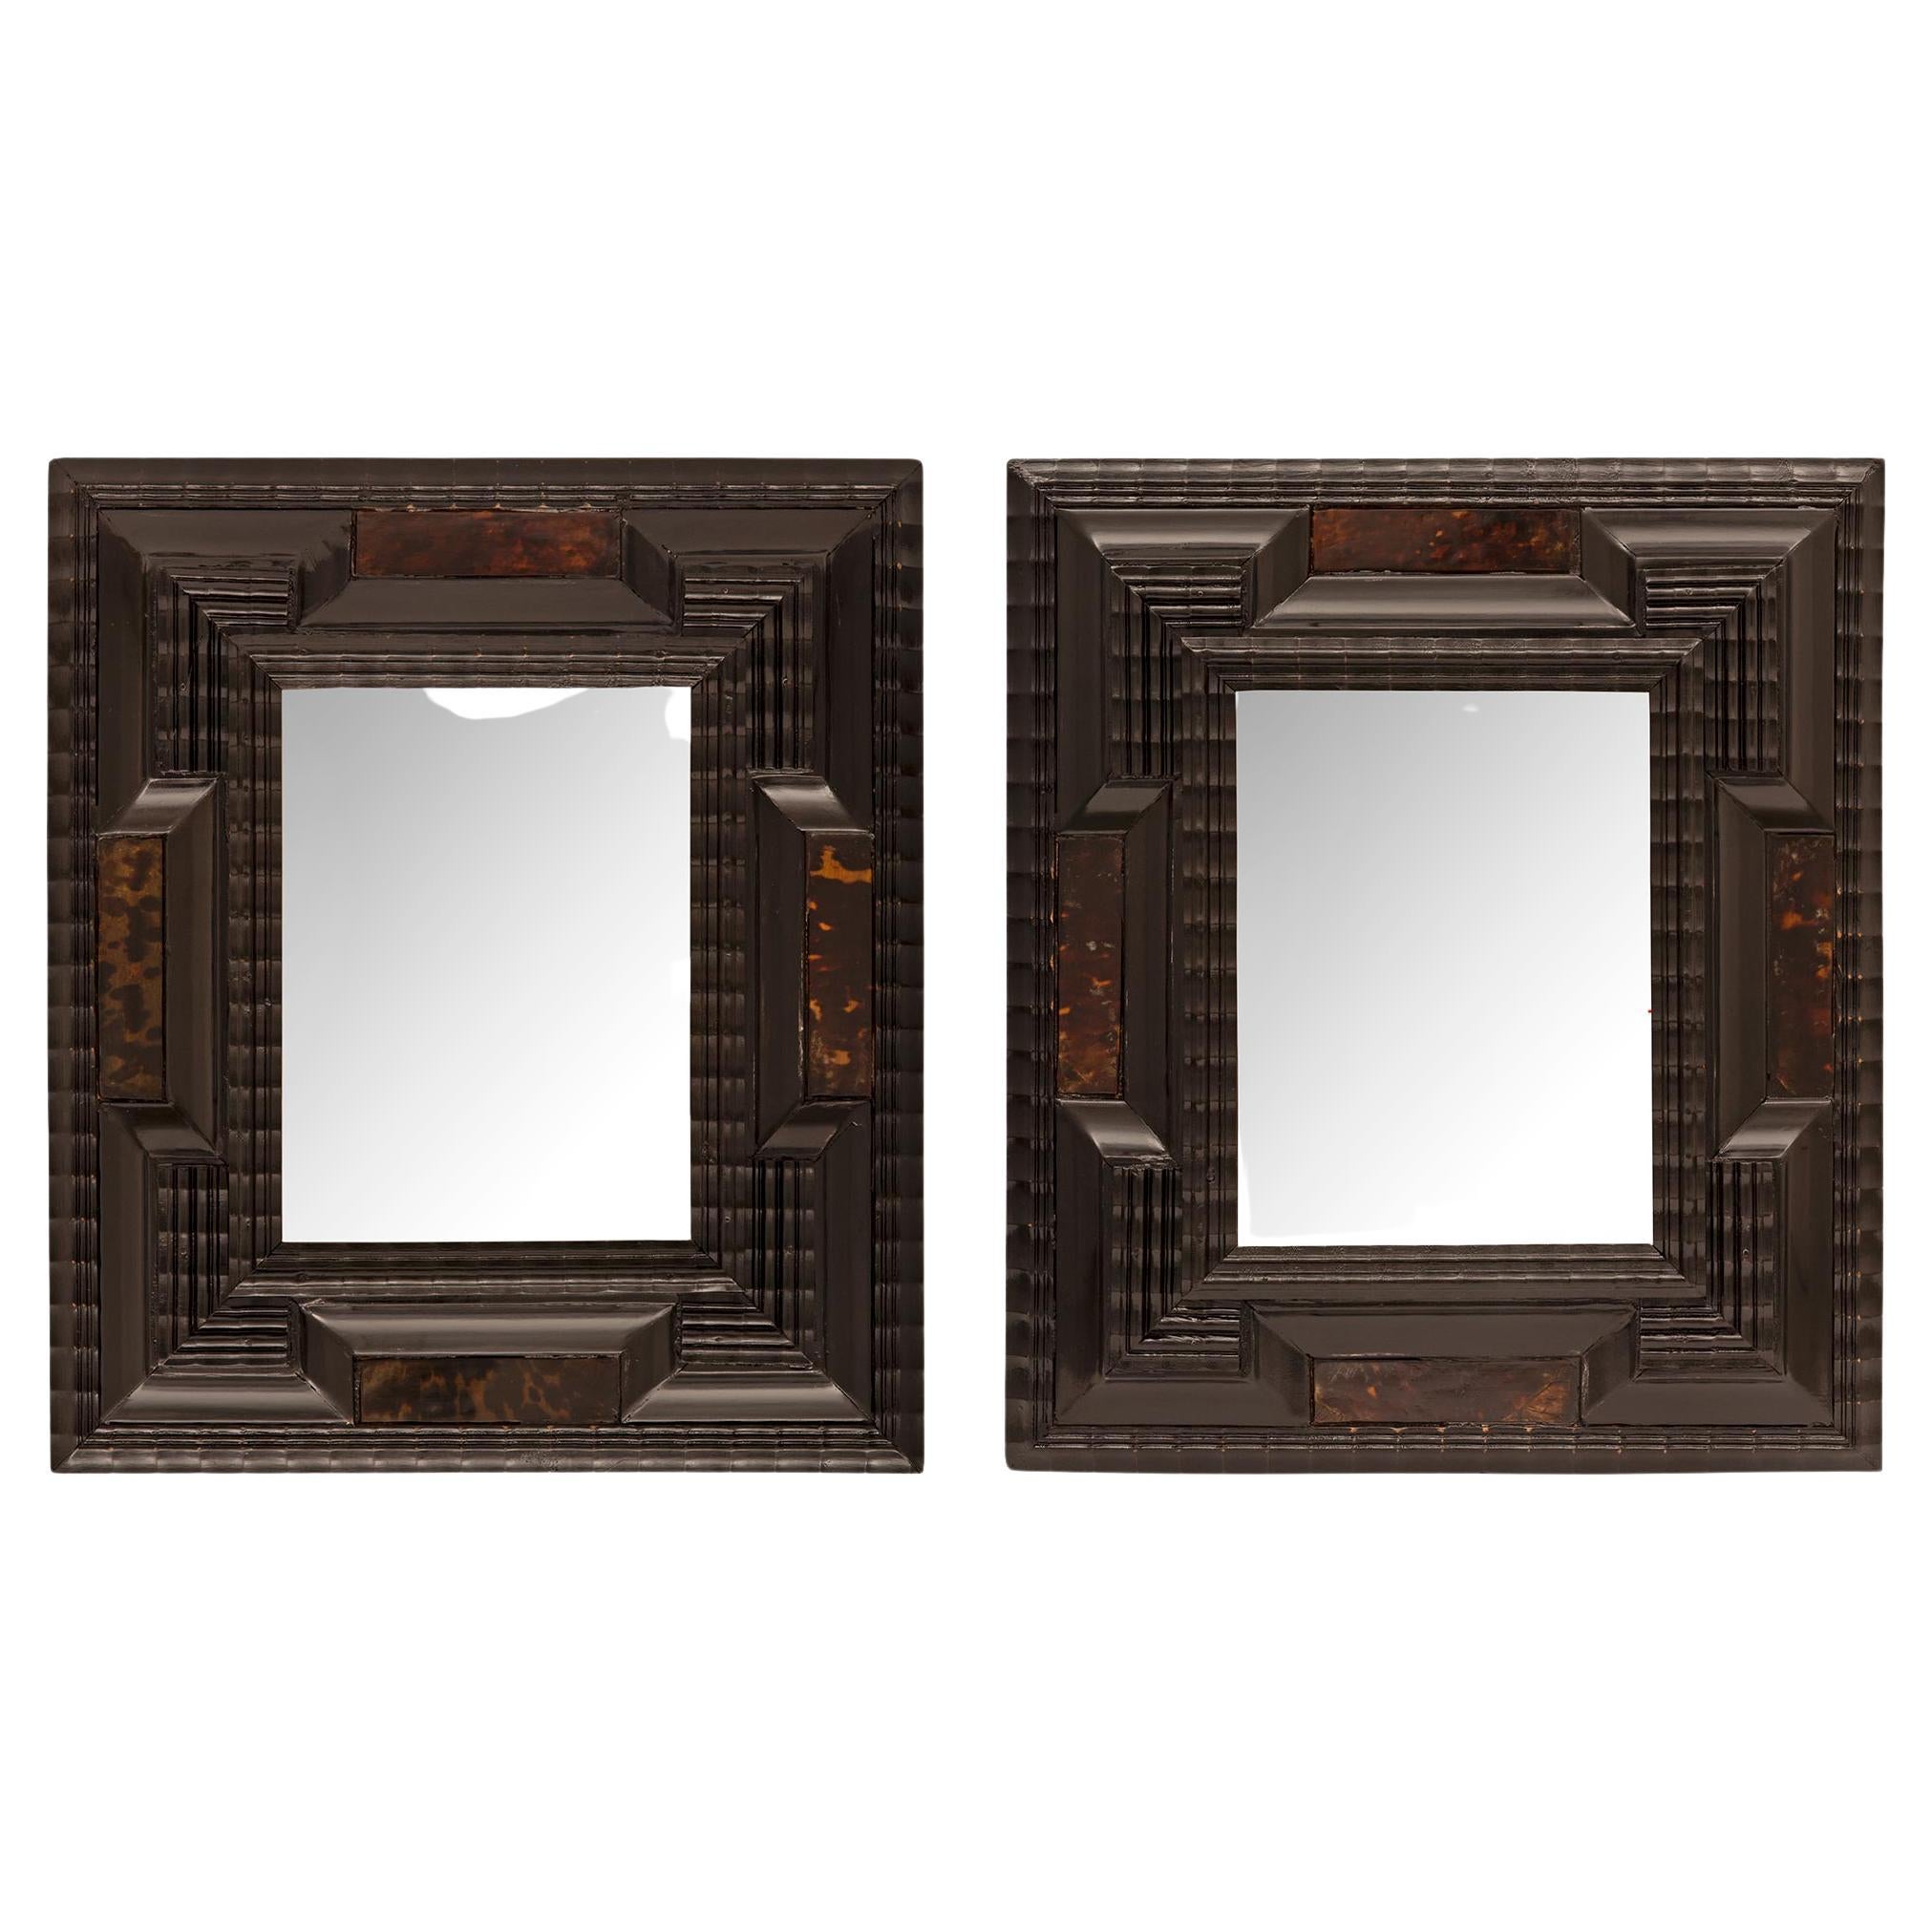 Pair of Italian 17th Century Small Scale Florentine Mirrors/Picture Frames